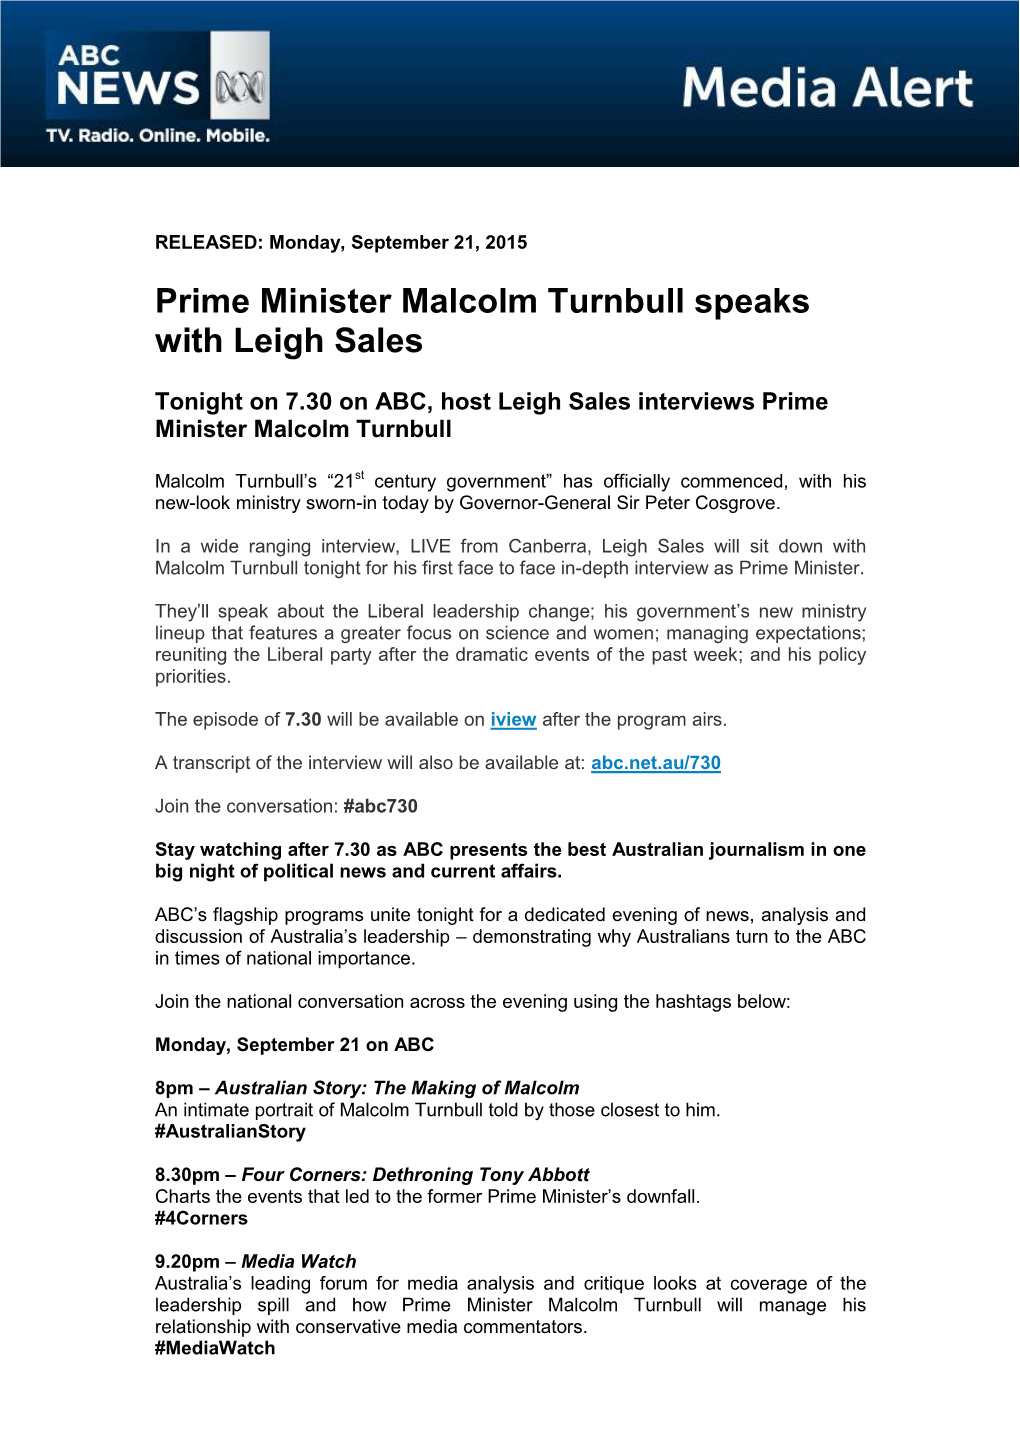 Prime Minister Malcolm Turnbull Speaks with Leigh Sales